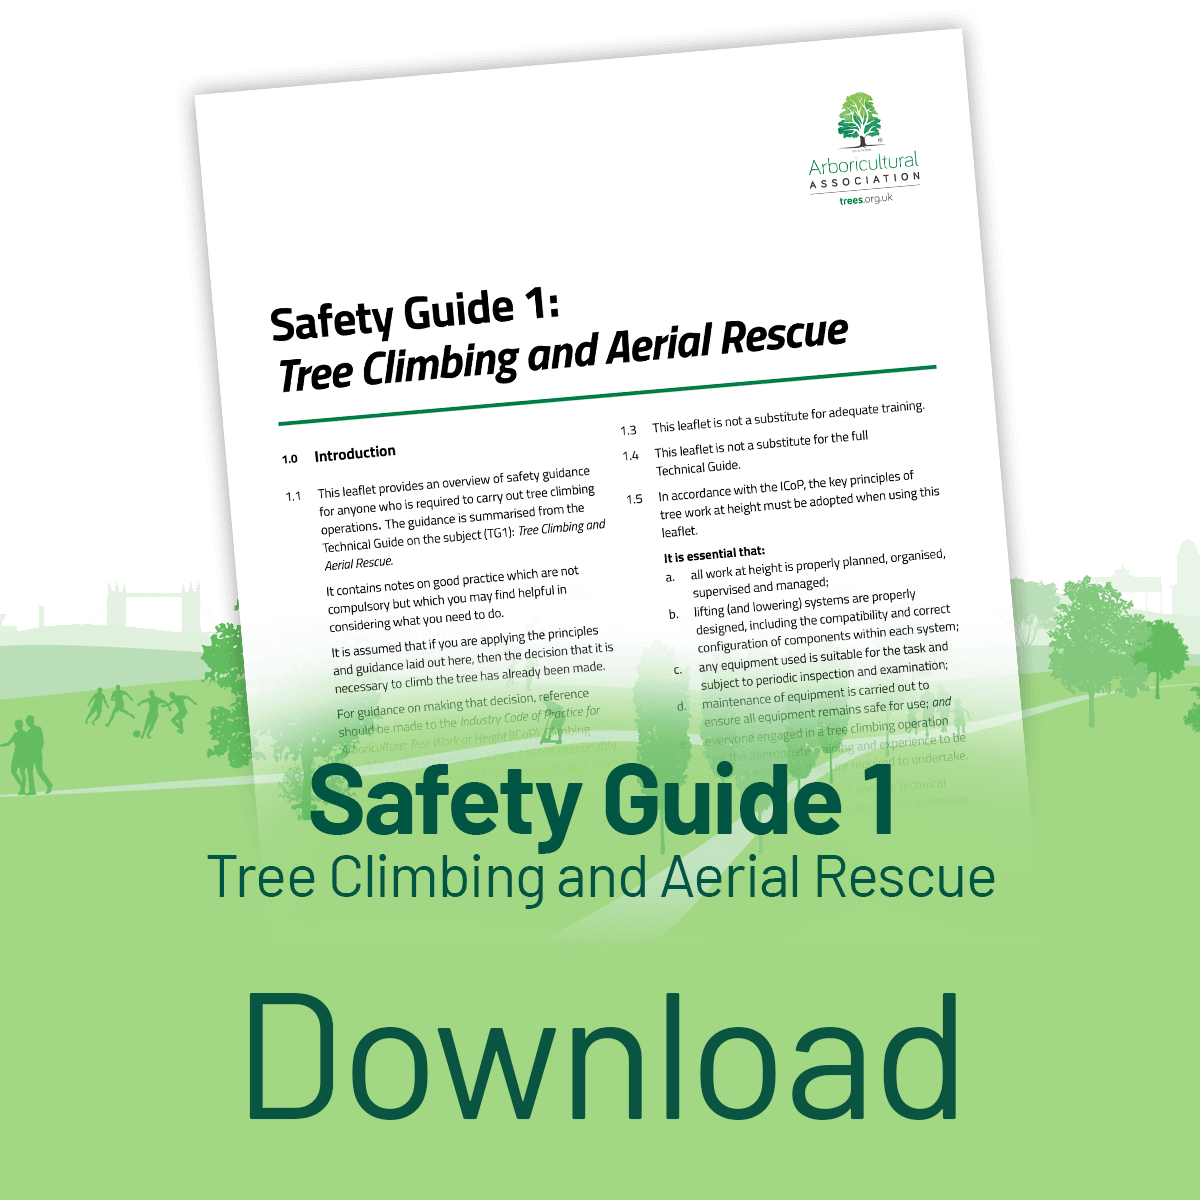 Download the Safety Guide 1